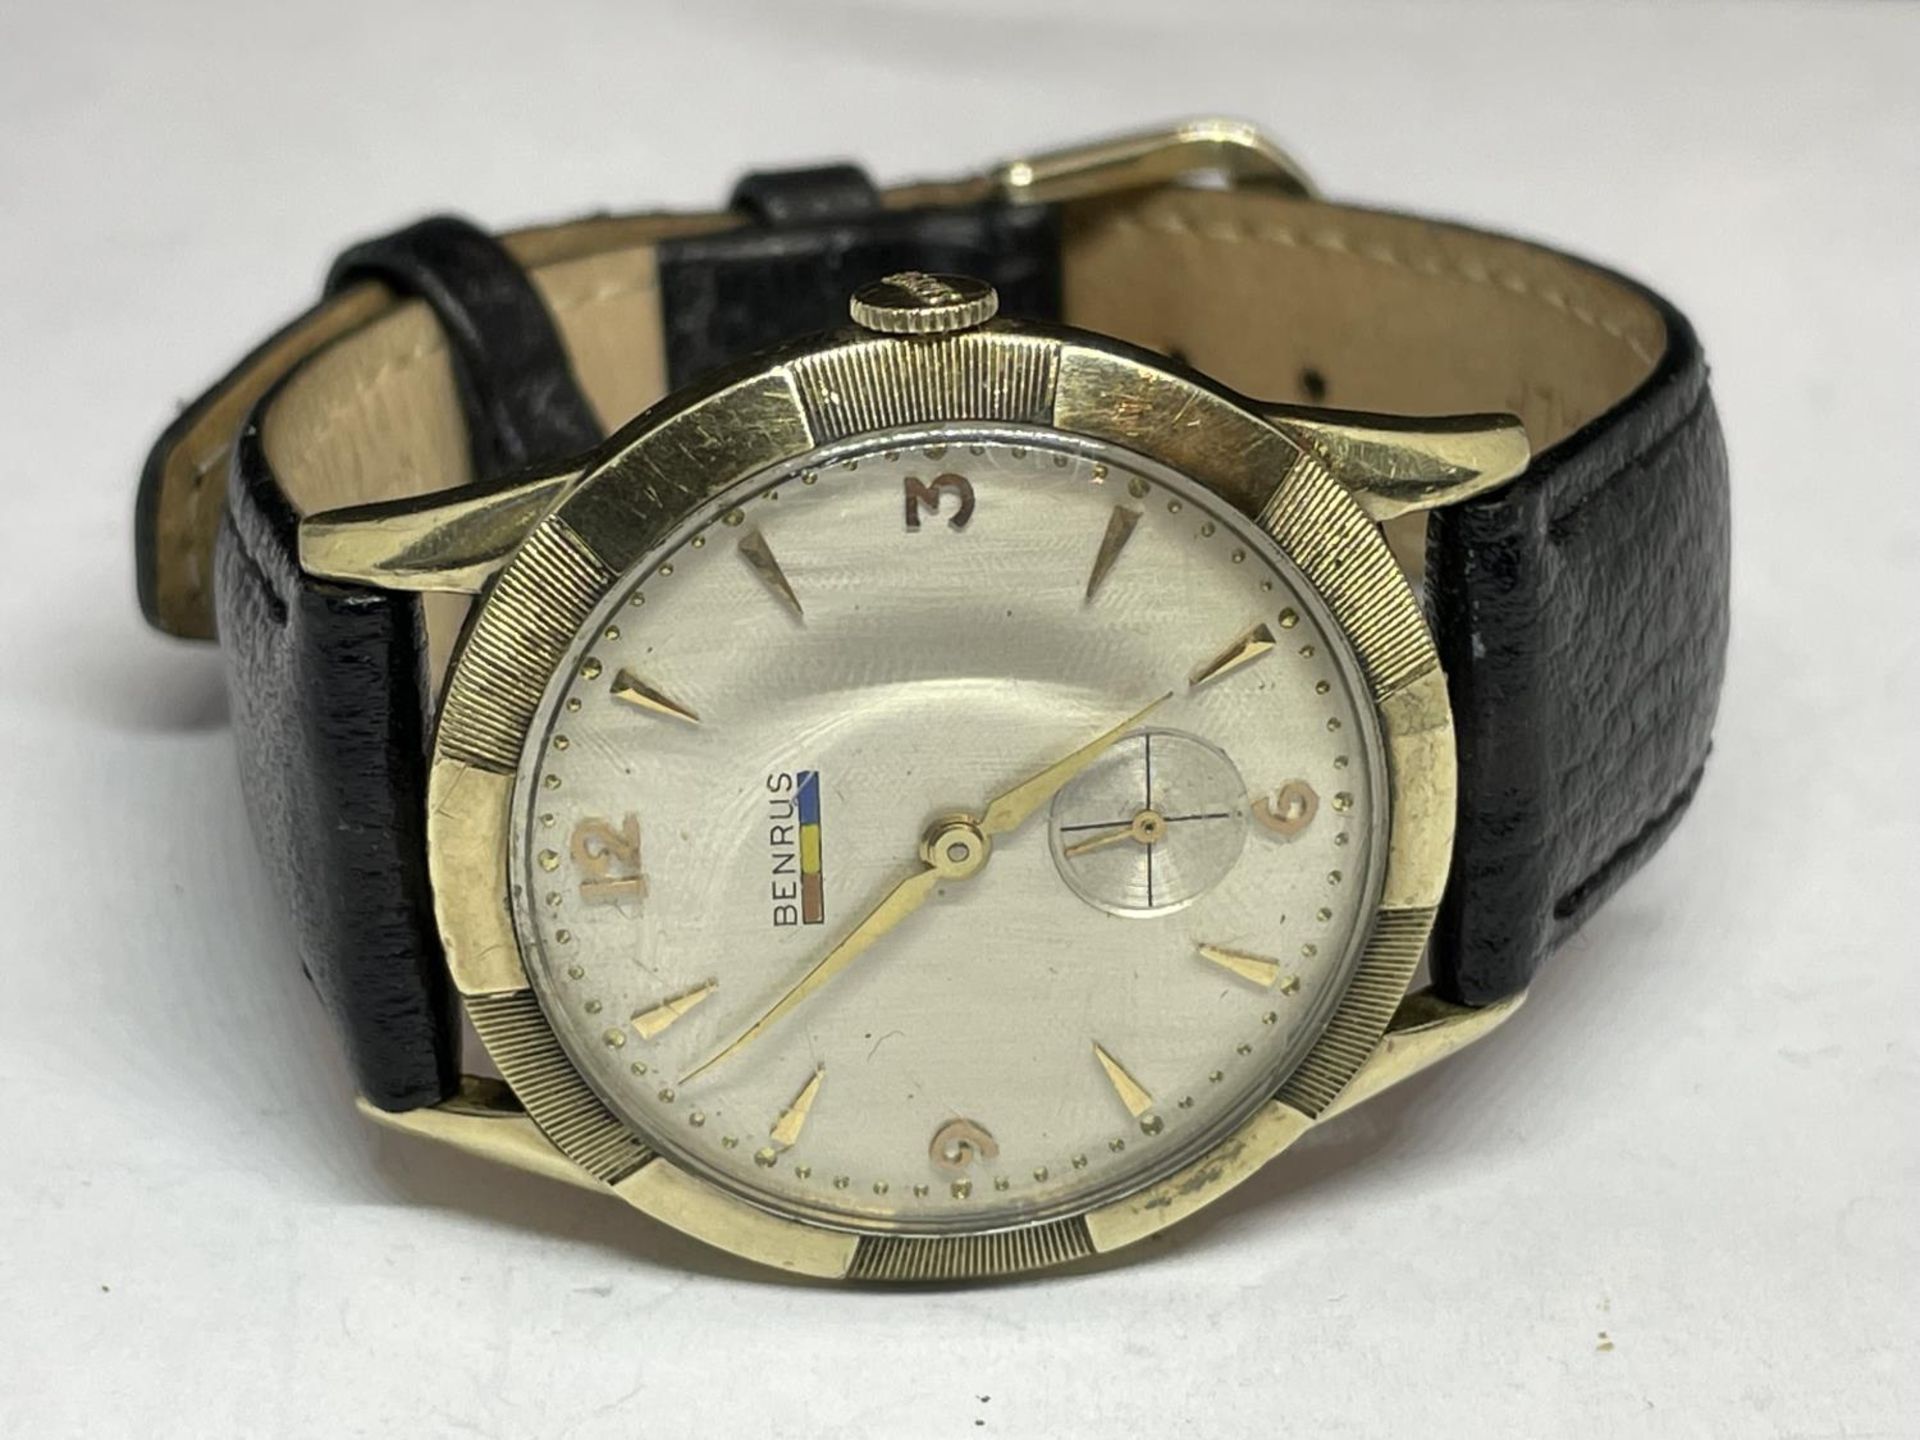 A BENRUS VINTAGE SUB DIAL WRIST WATCH SEEN WORKING BUT NO WARRANTY ENGRAVED - Image 4 of 9